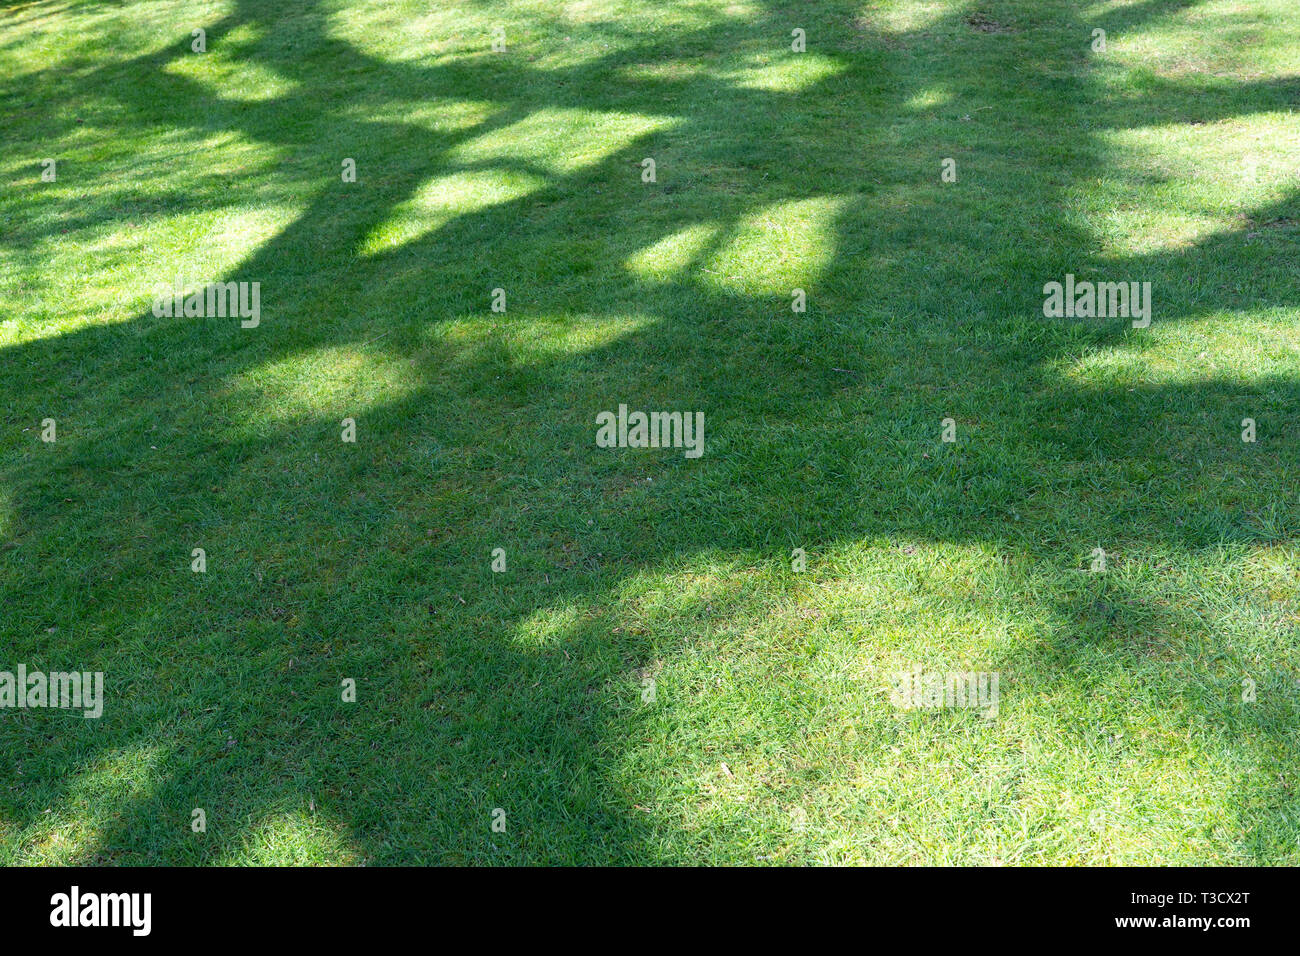 Abstract shadows from trees on a grass lawn in the UK Stock Photo